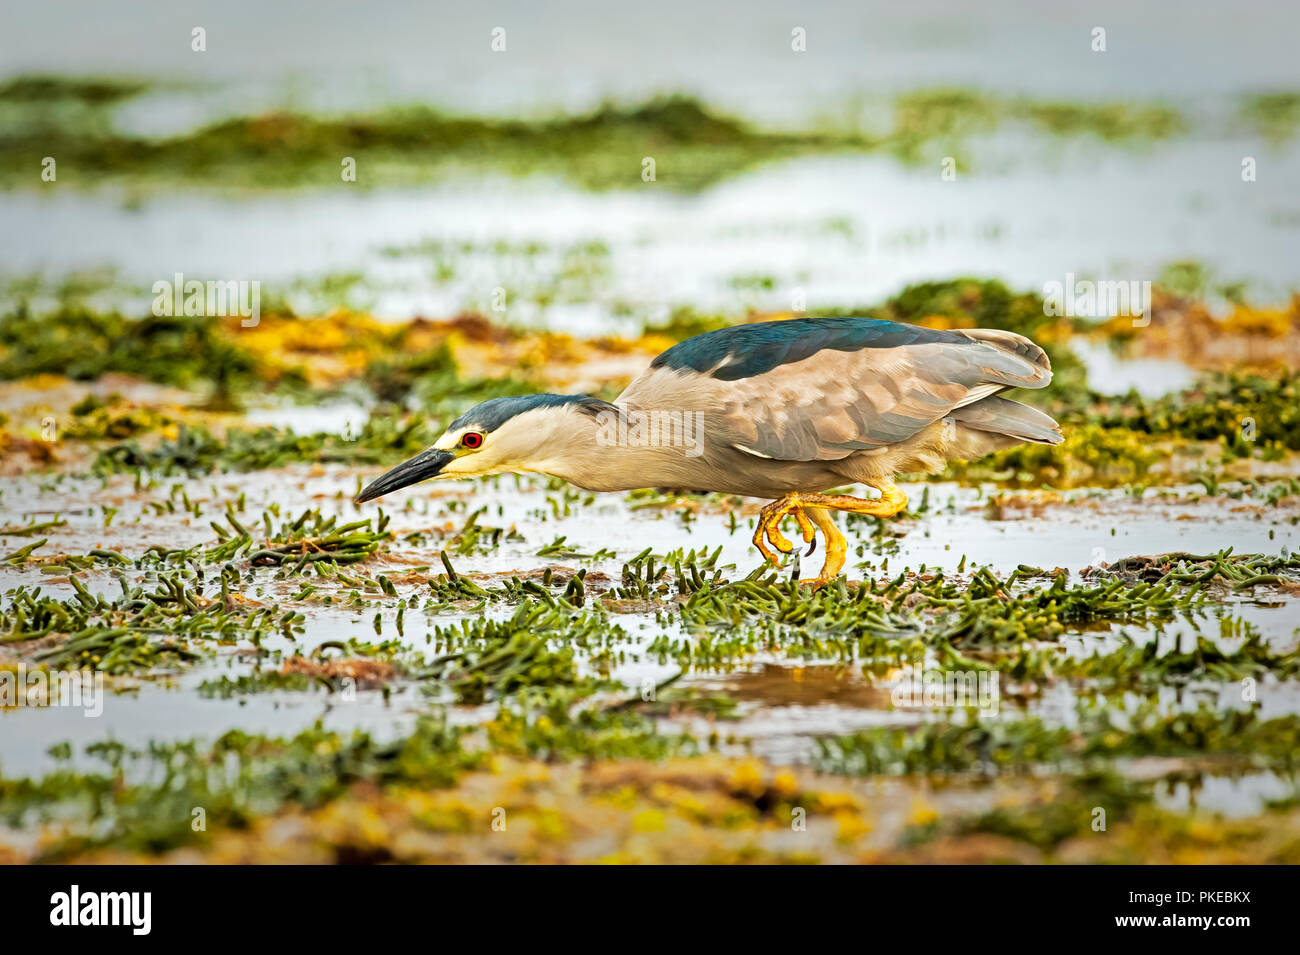 Black-crowned night heron (Nycticorax nycticorax) walking in shallow water; Carcass Island, Falkland Islands Stock Photo